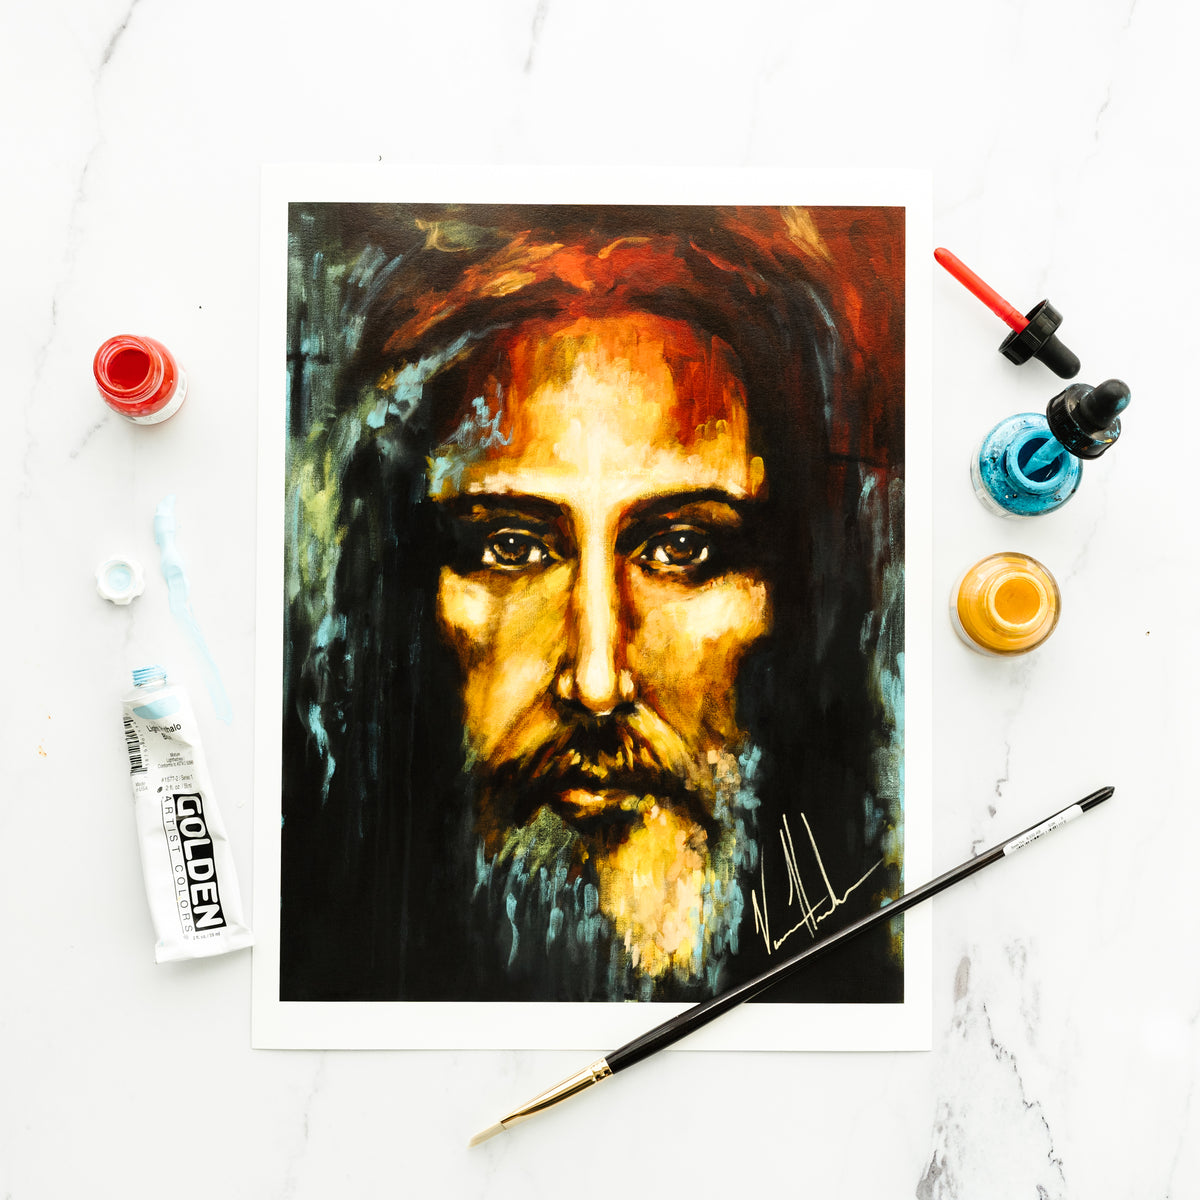 DESIGN DISCONTINUED - The Shroud of Turin